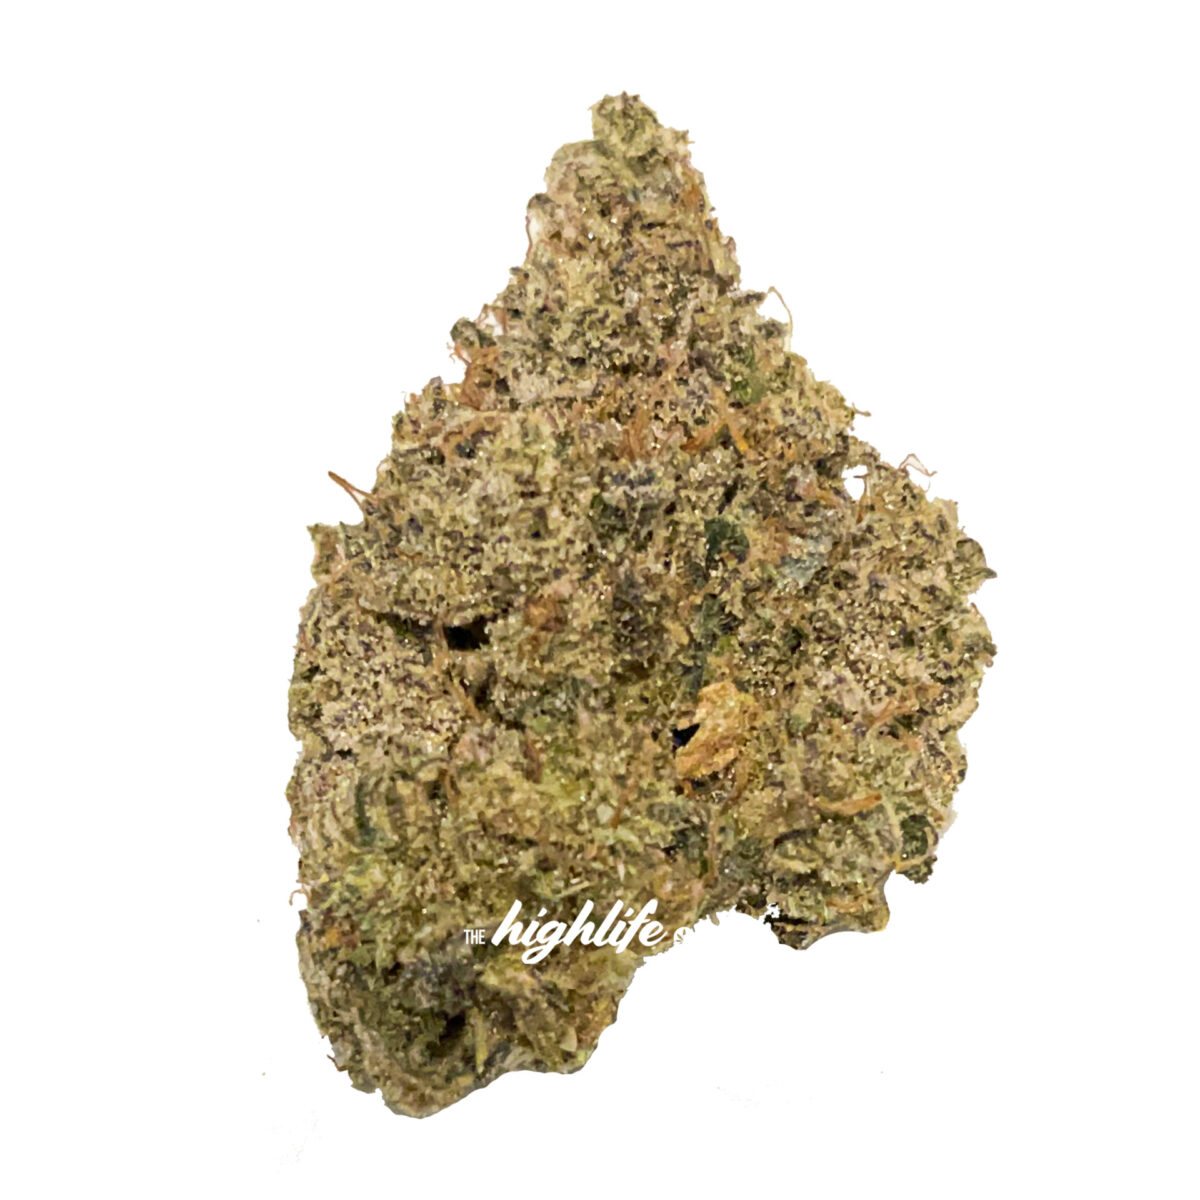 Panama red strain for delivery - Ottawa cannabis store